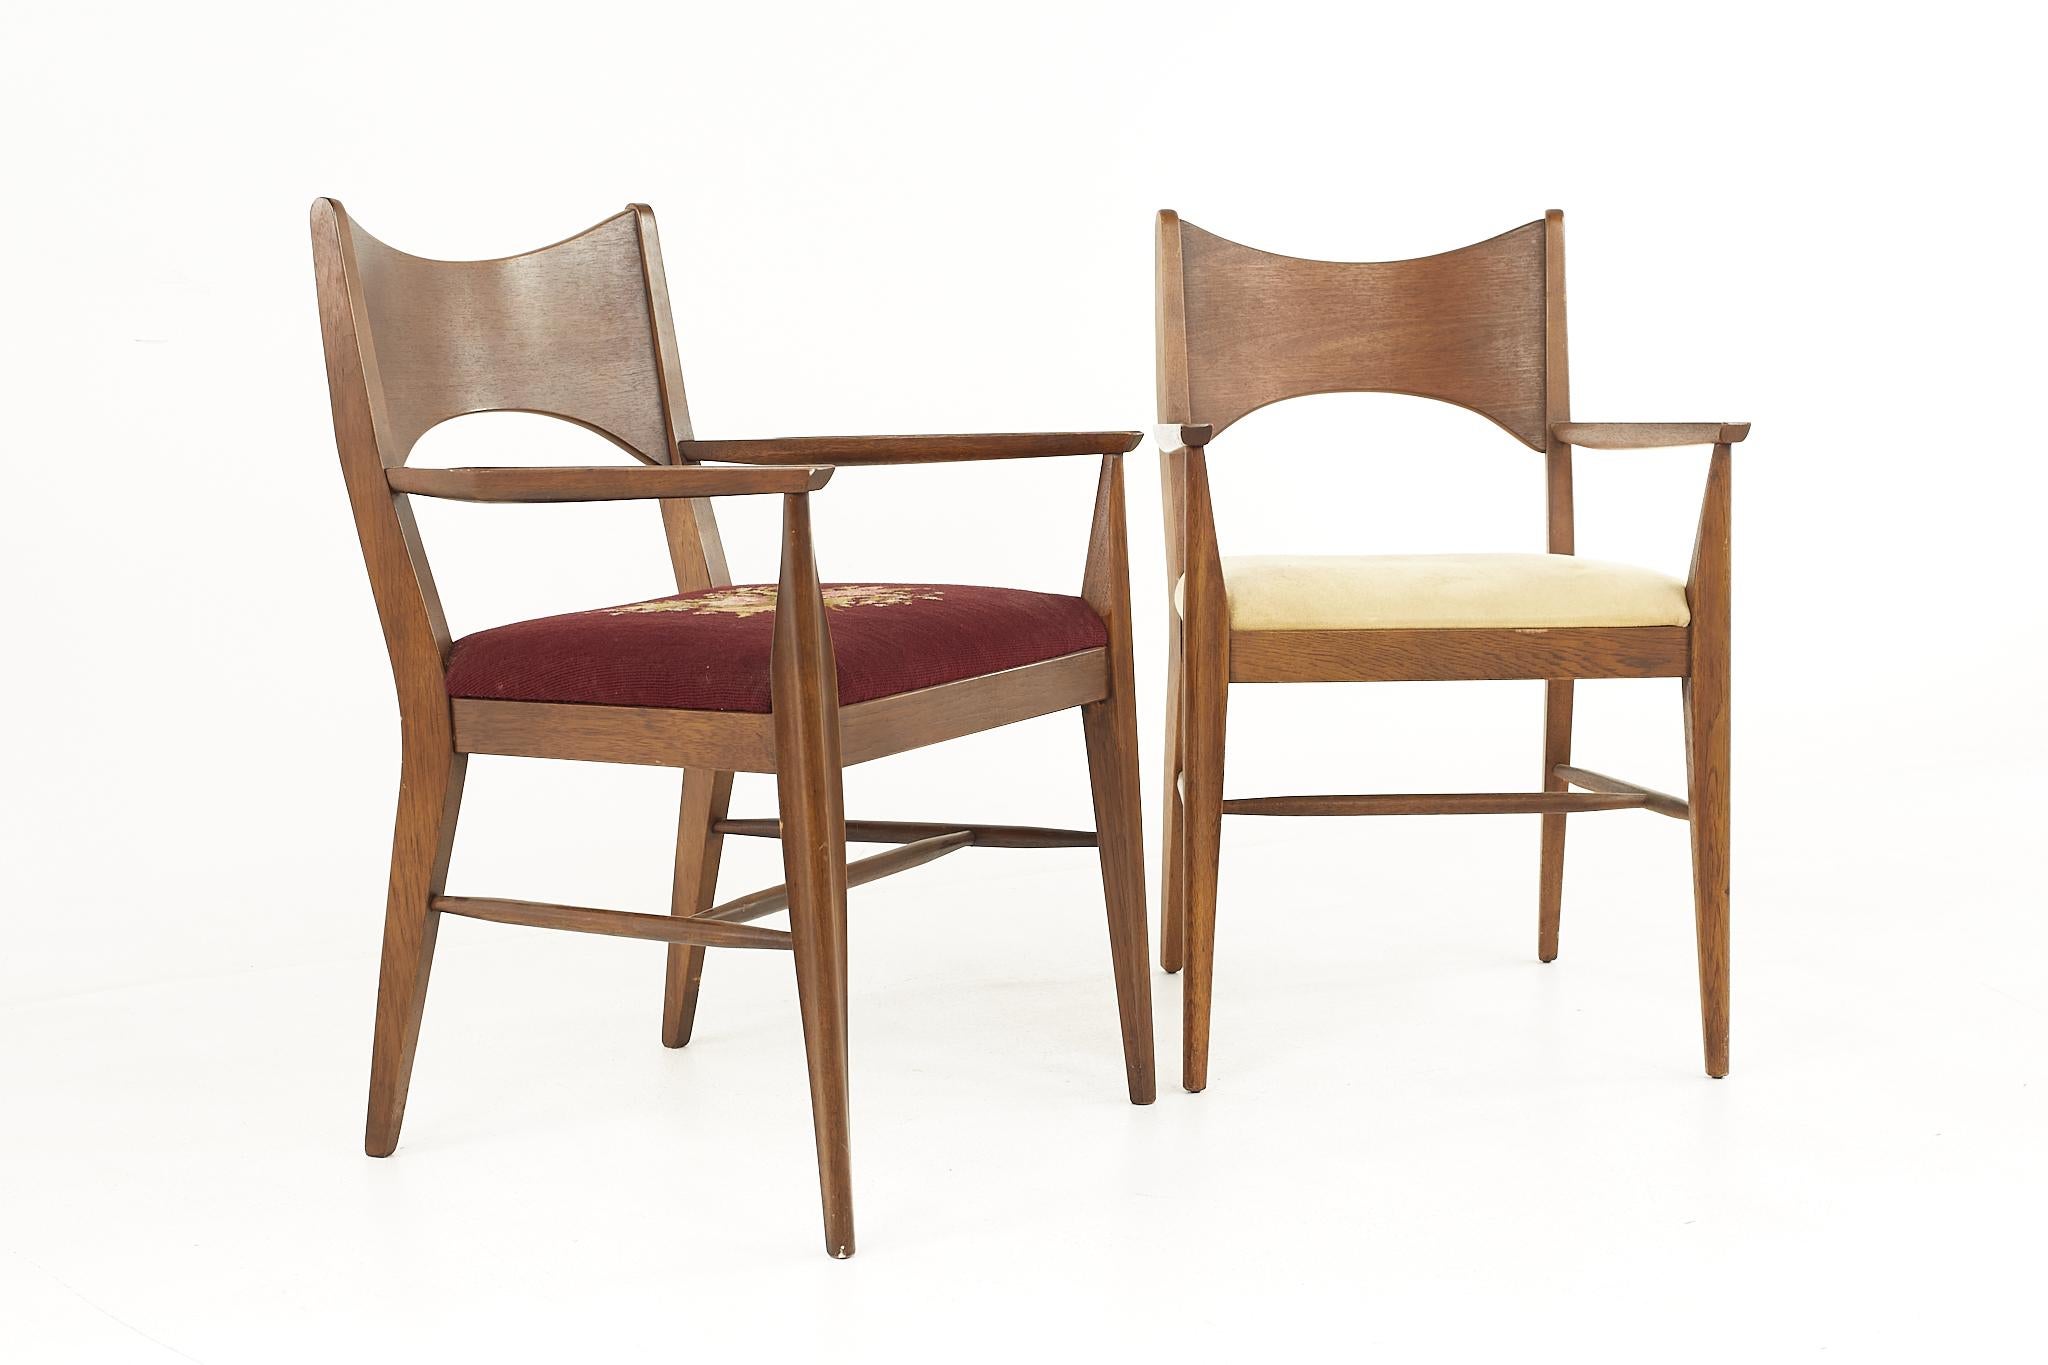 Broyhill Saga midcentury Walnut Captain Dining Chairs - Pair

Each chair measures: 22 wide x 23.5 deep x 34 high, with a seat height of 18.5, arm height of 25.5 and chair clearance of the chairs with arms is 25.75 inches

All pieces of furniture